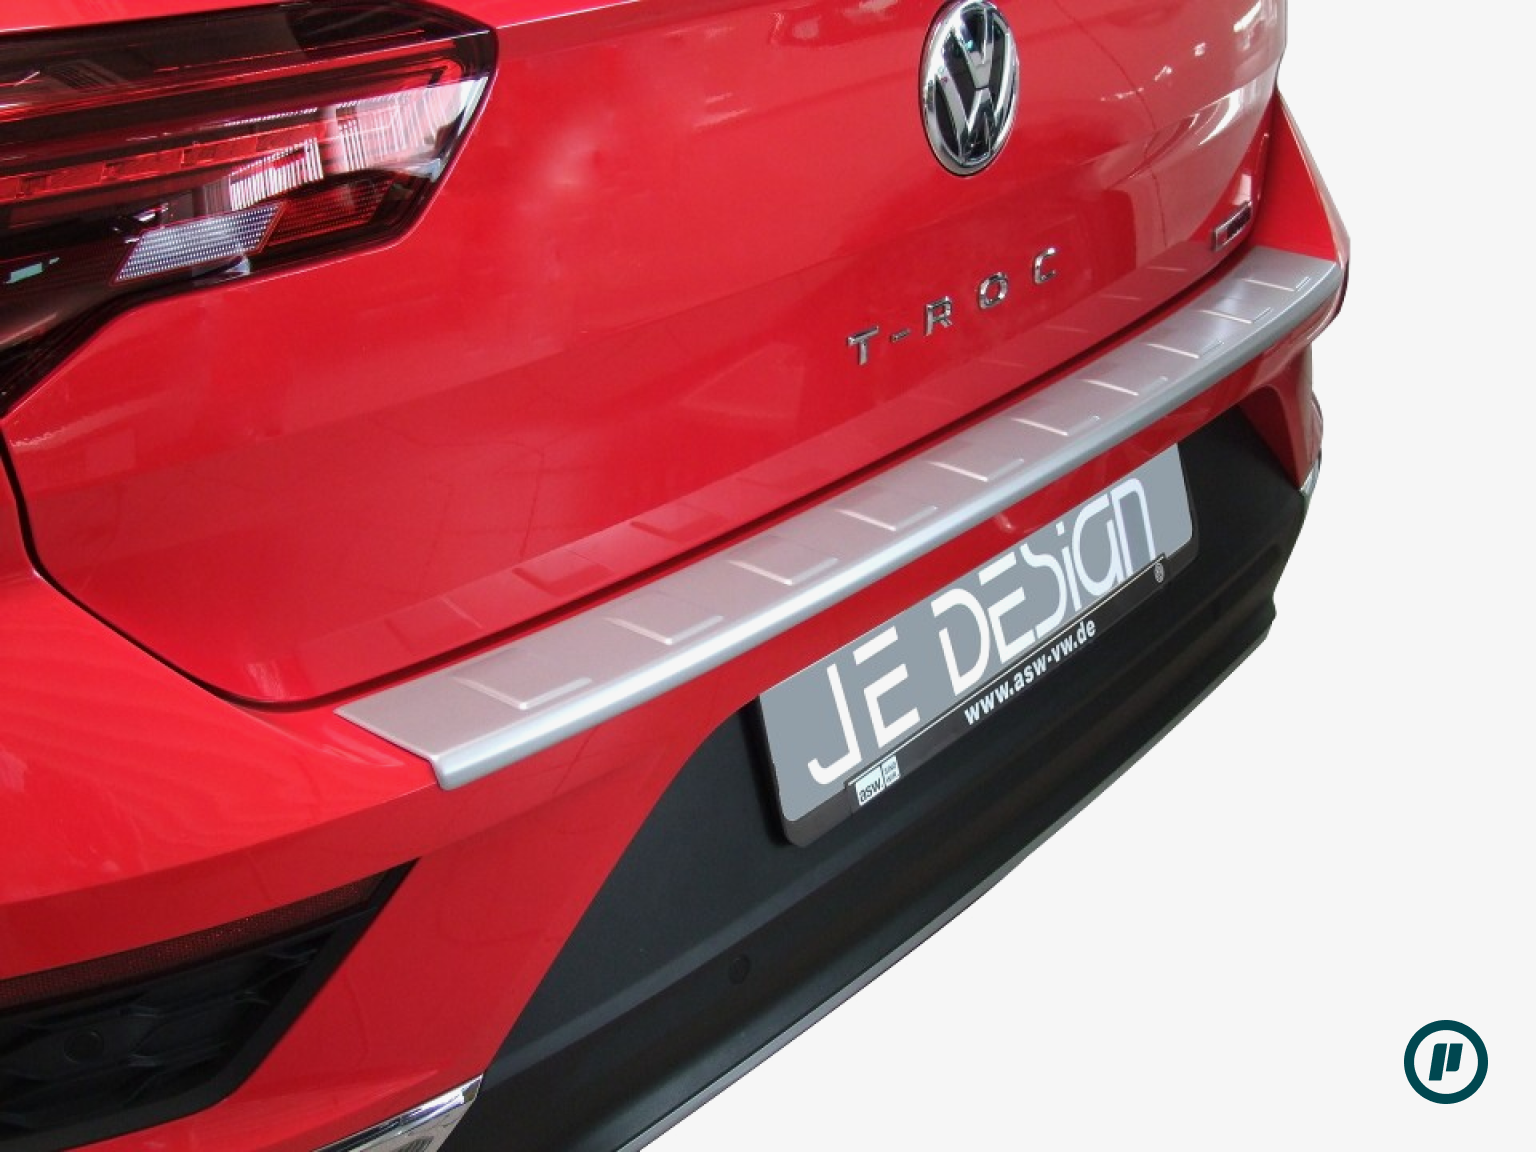 JE Design - Trunk Protection for VW T-Roc (A1 2017 - 2021)